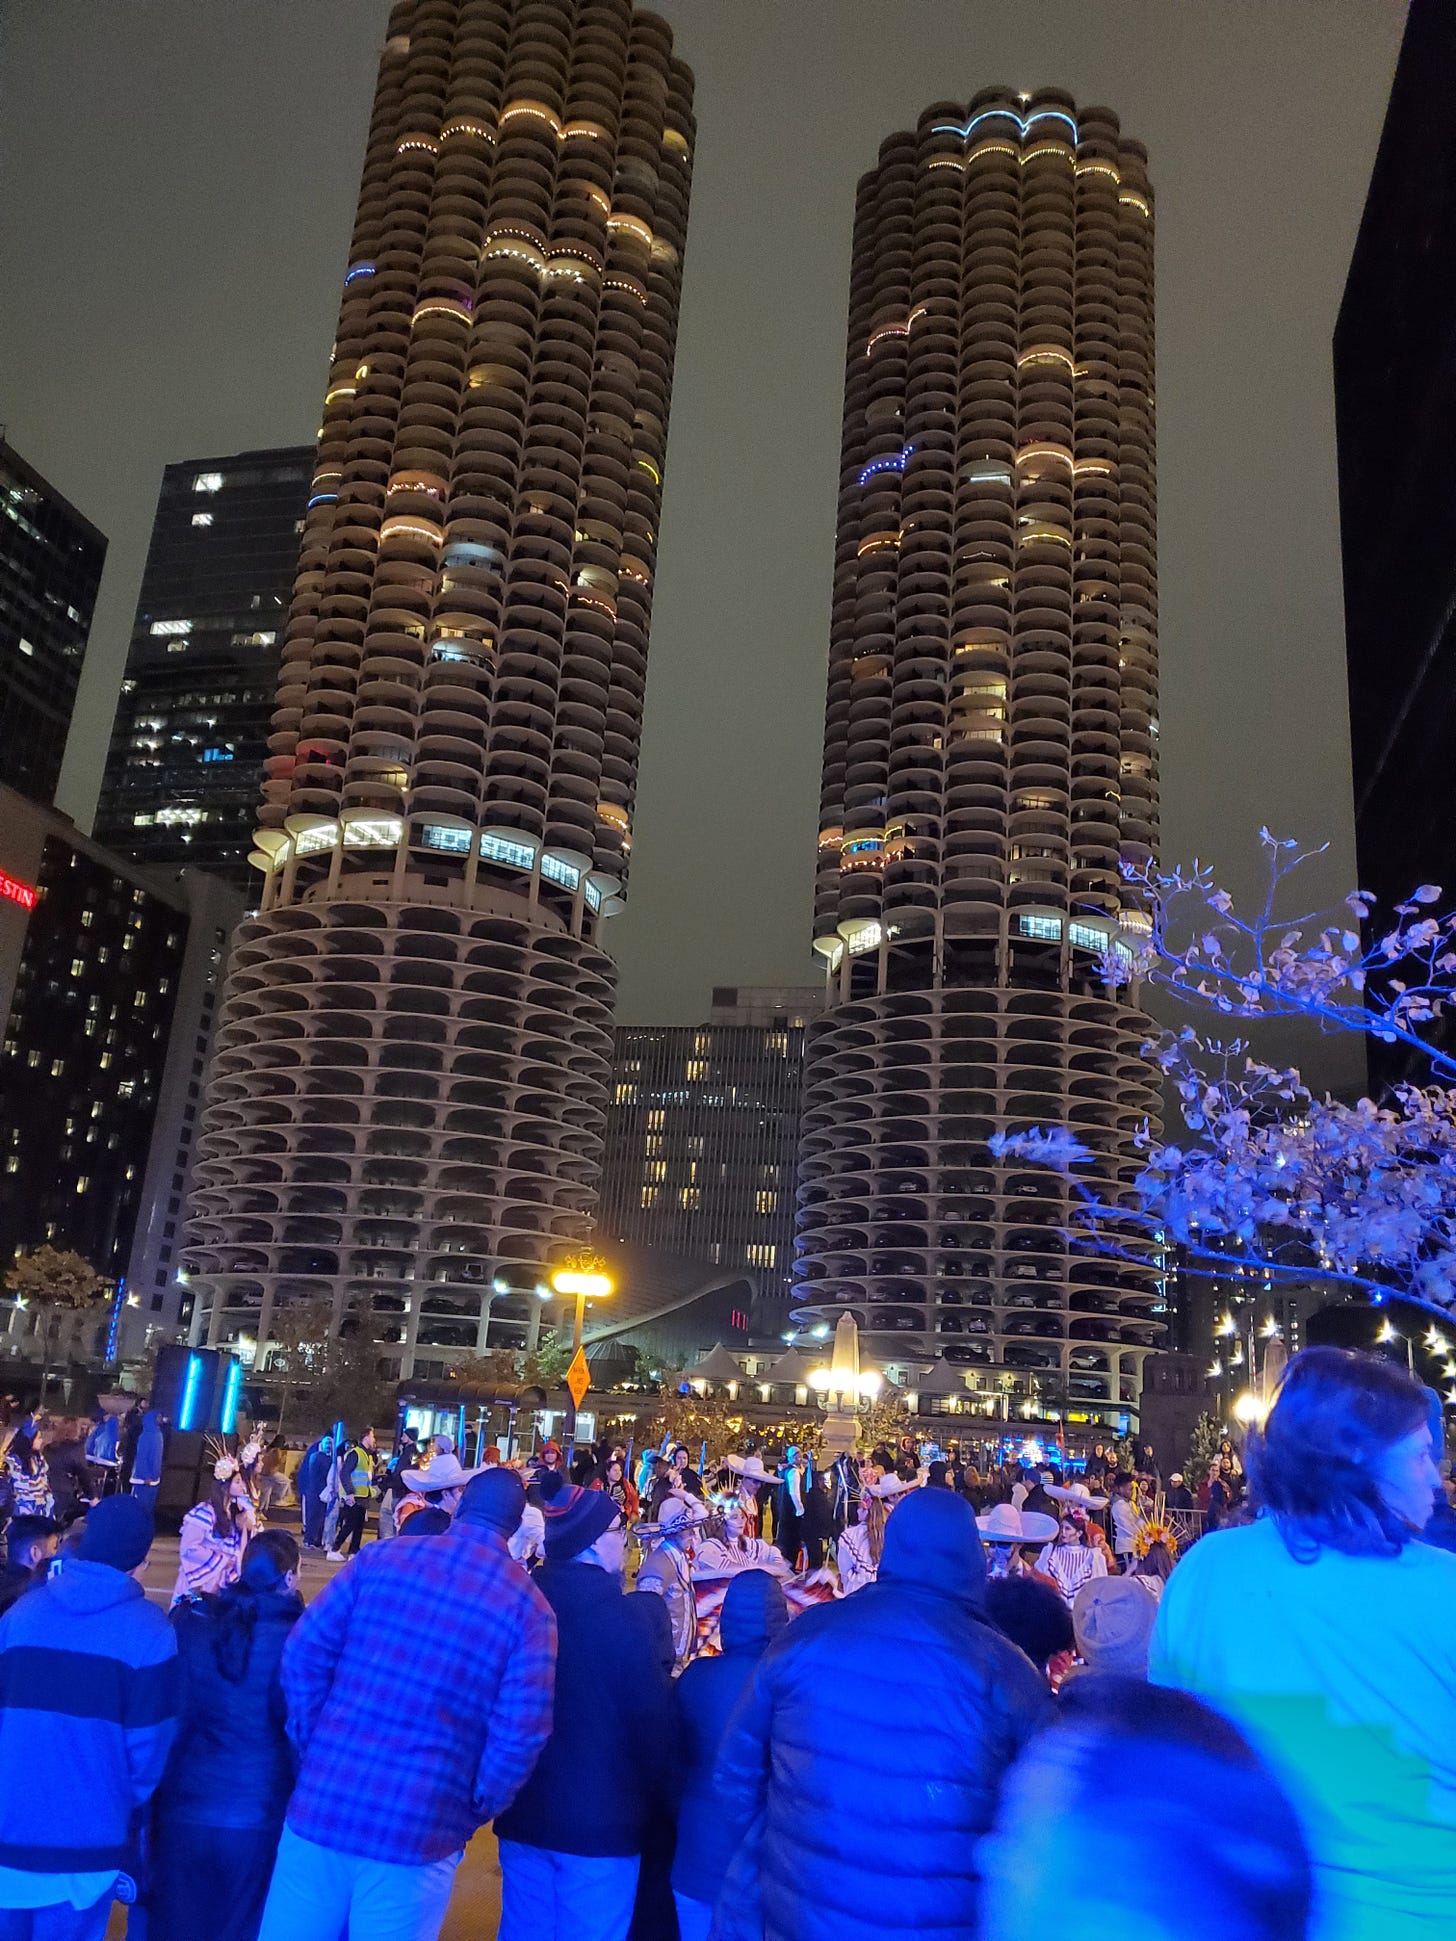 Chicago's marina towers at night with a parade of costumed people heading to the right